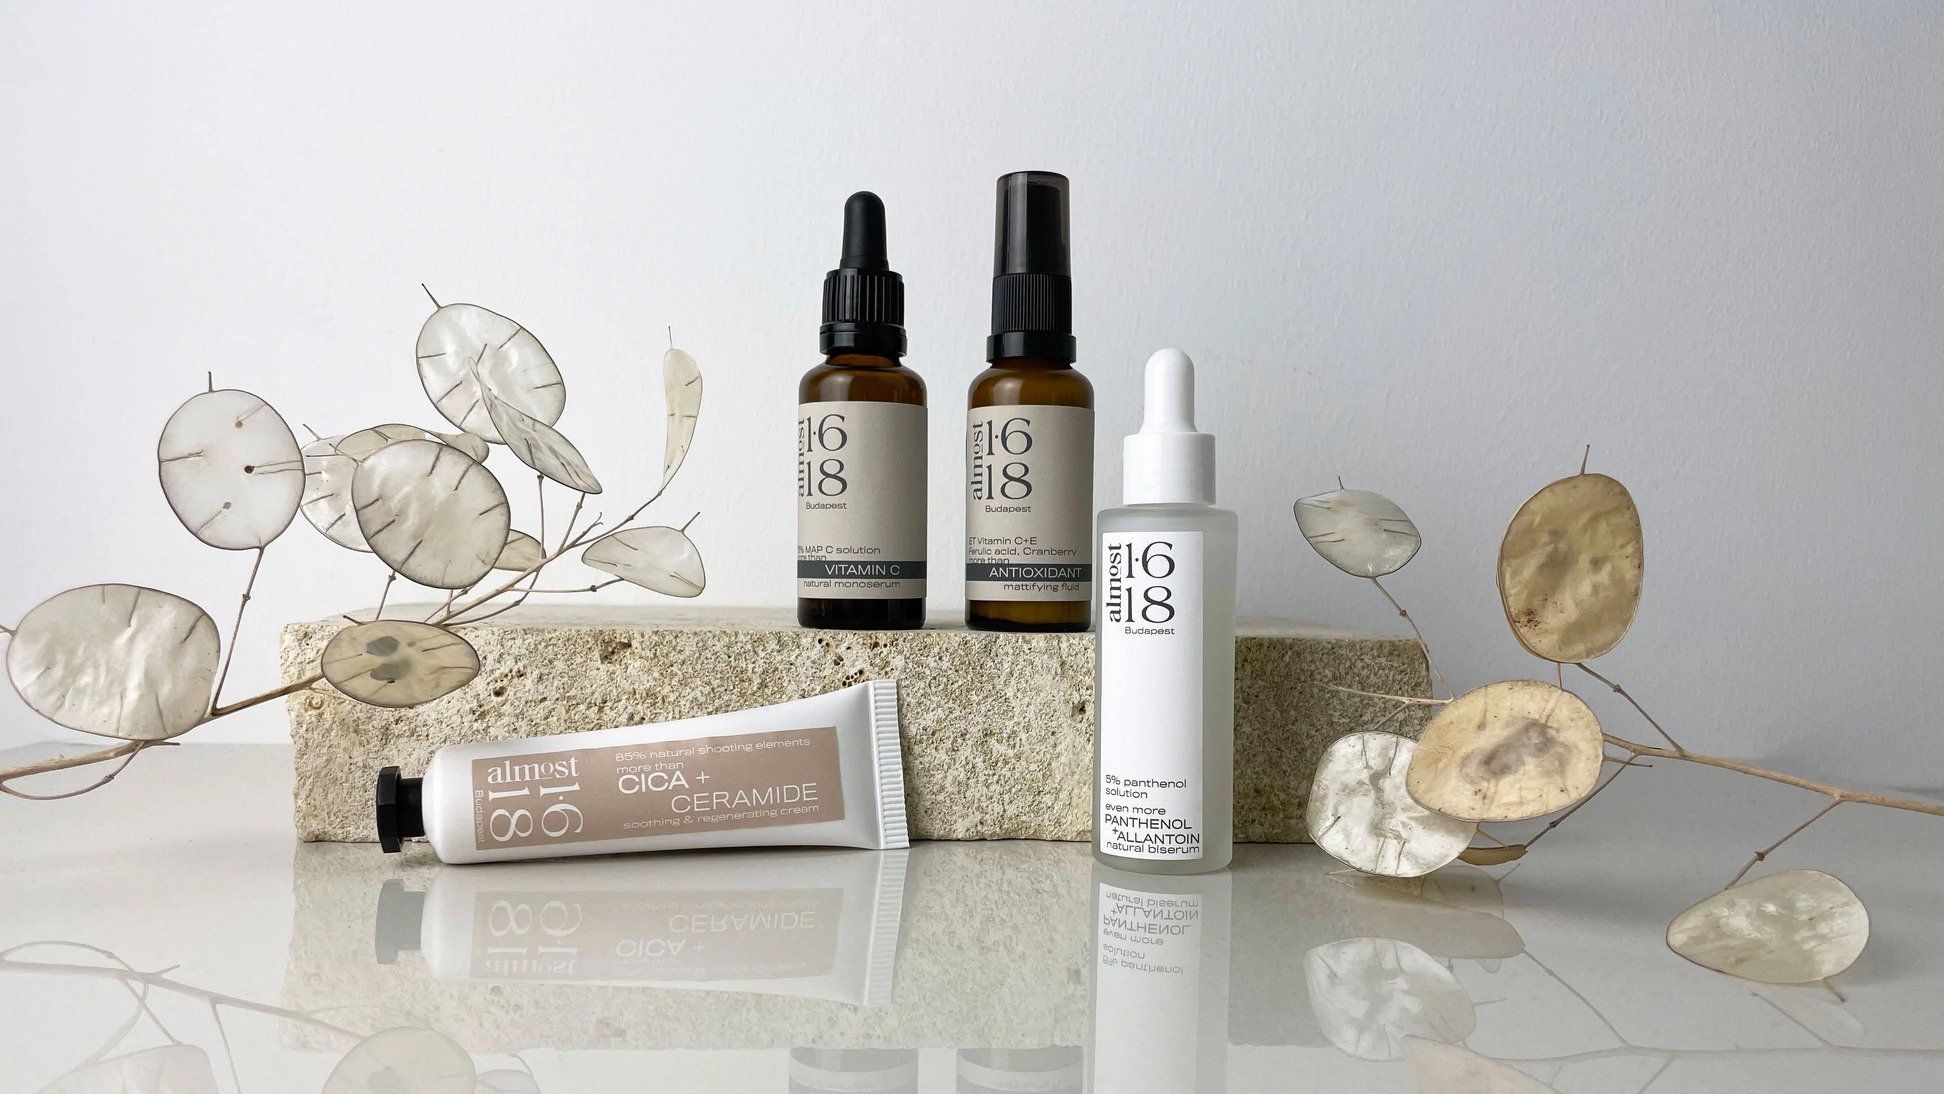 A Hungarian brand has entered the world of skincare and became a favorite among young people